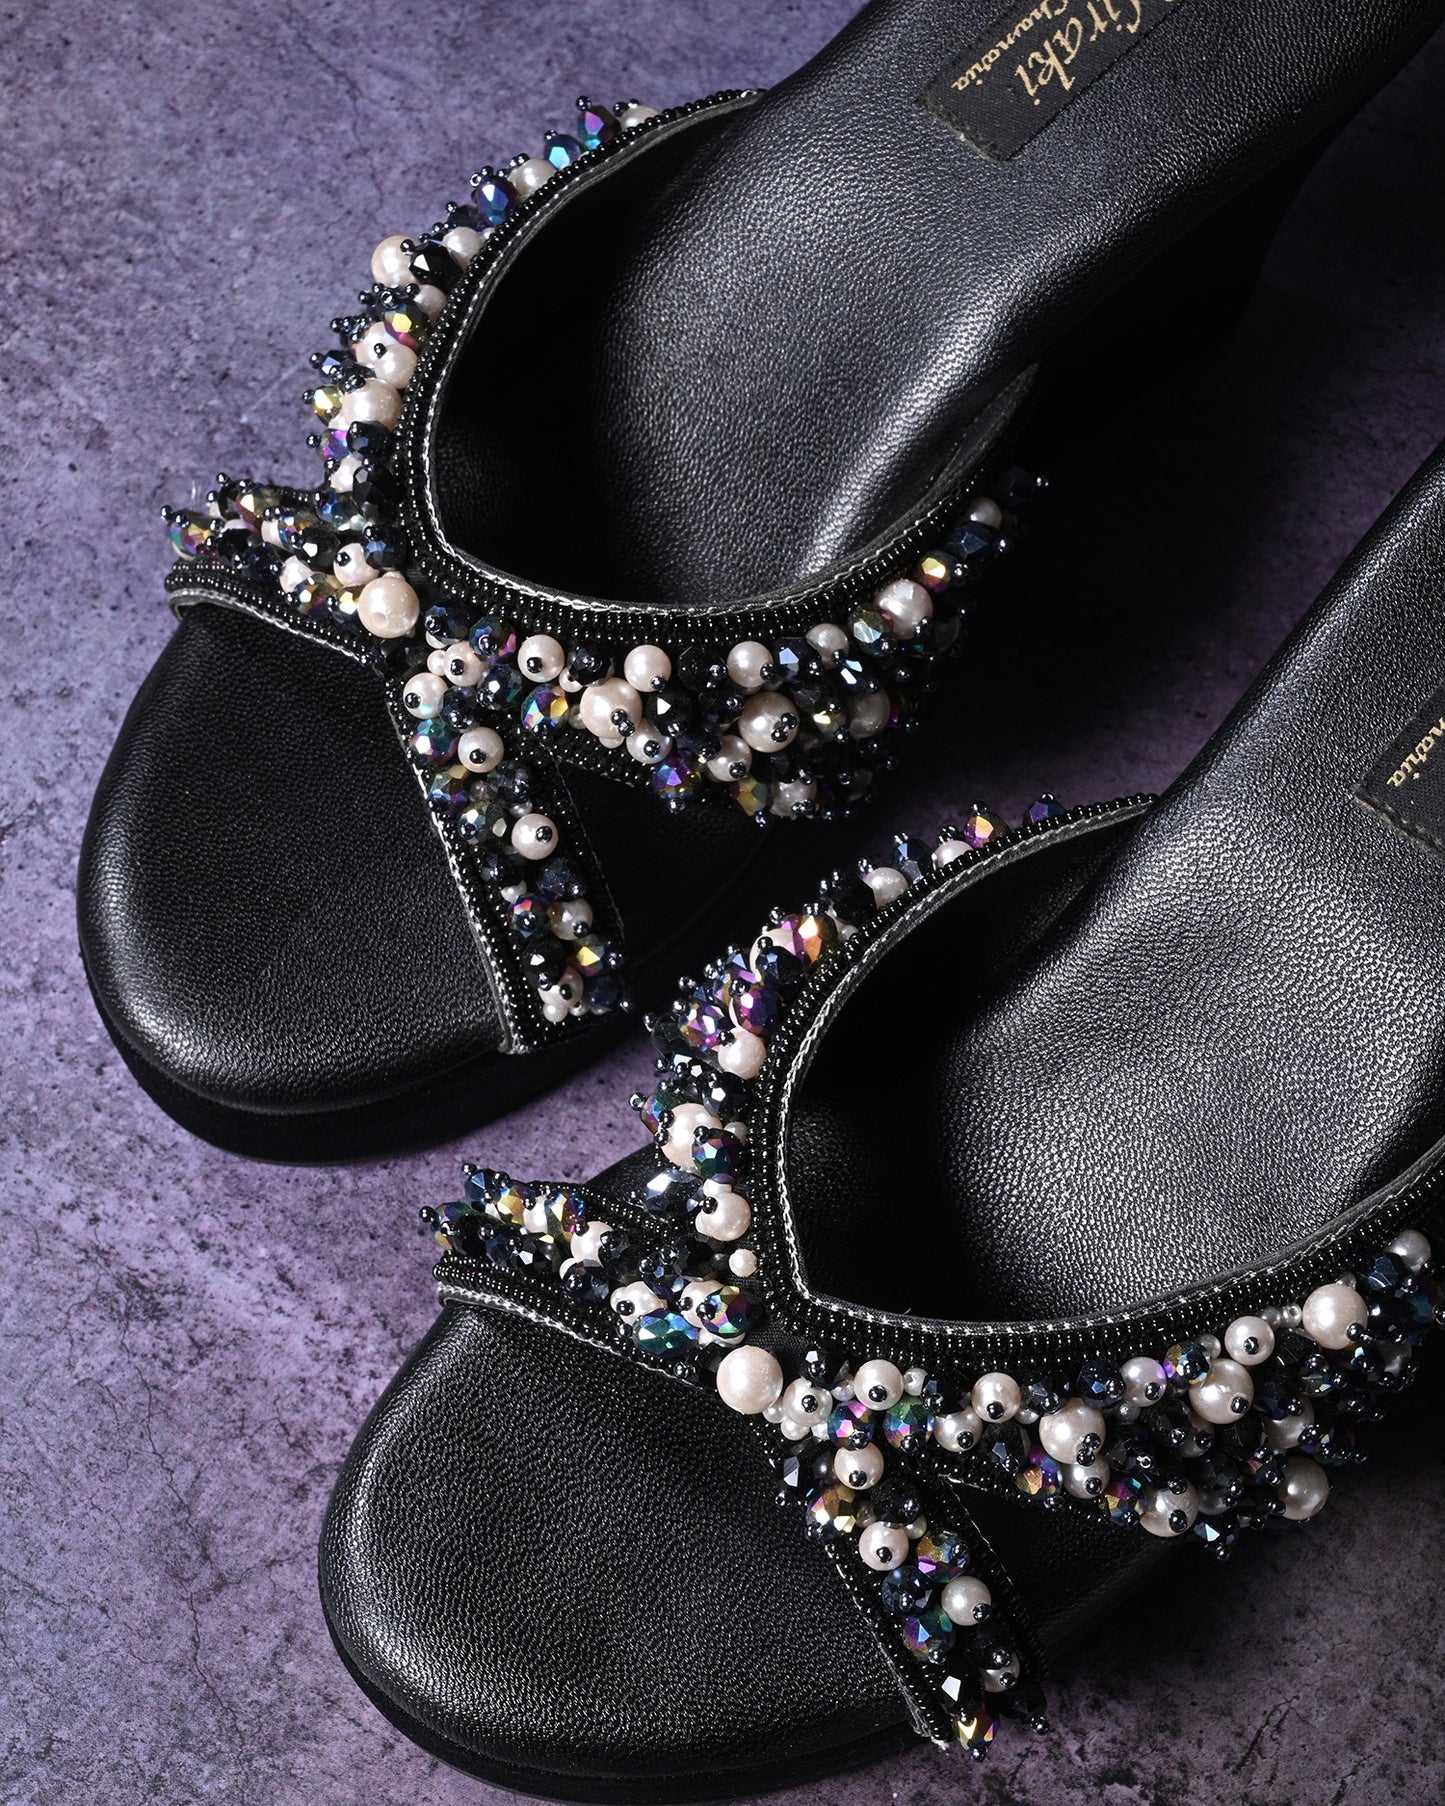 Black Handwork Wedges With Beads And Pearls